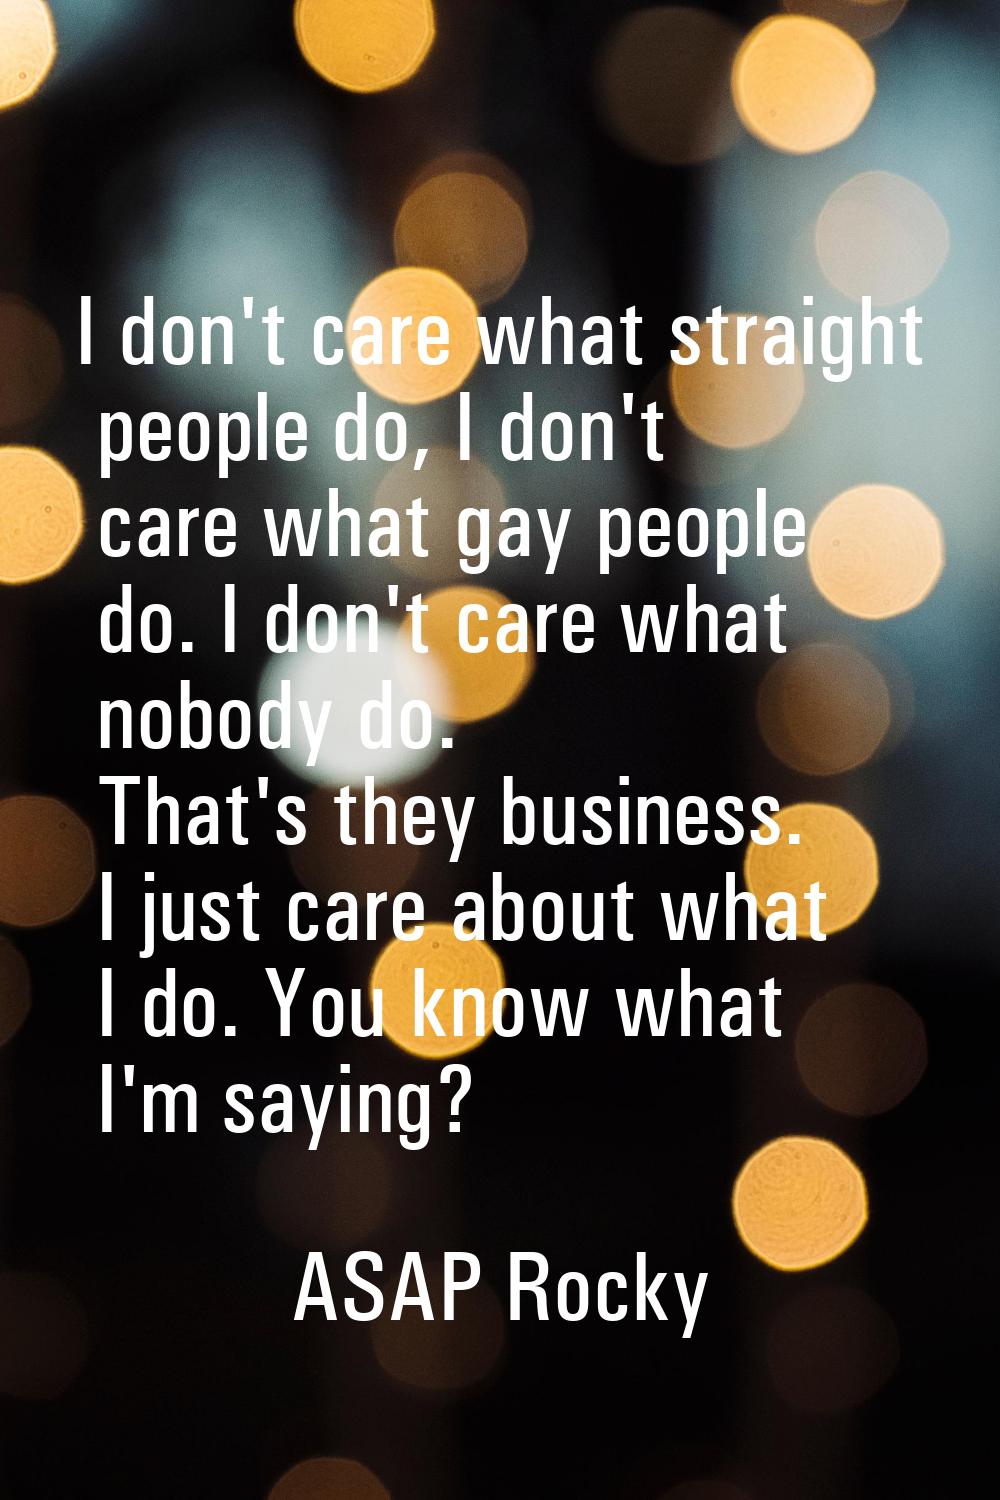 I don't care what straight people do, I don't care what gay people do. I don't care what nobody do.